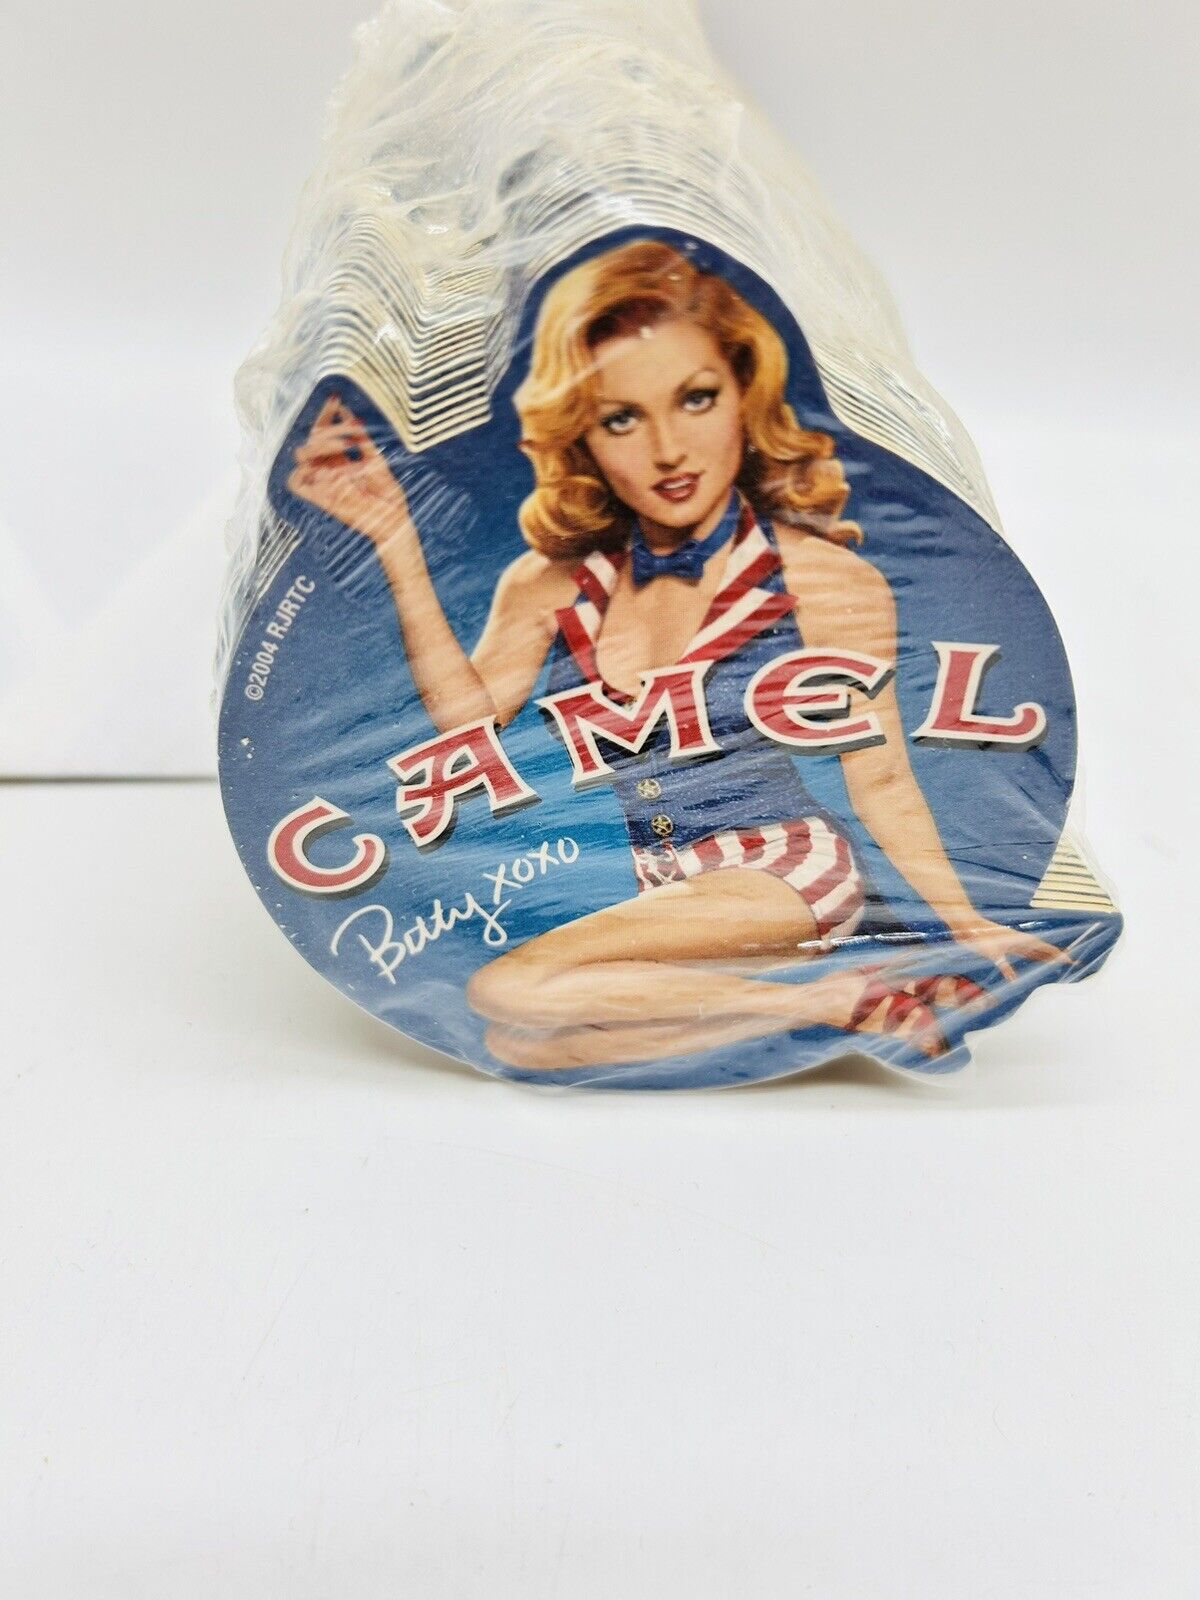 Lot of 120+ Camel Cigarette Bar Coasters 2004 Double Sided Betty XOXO